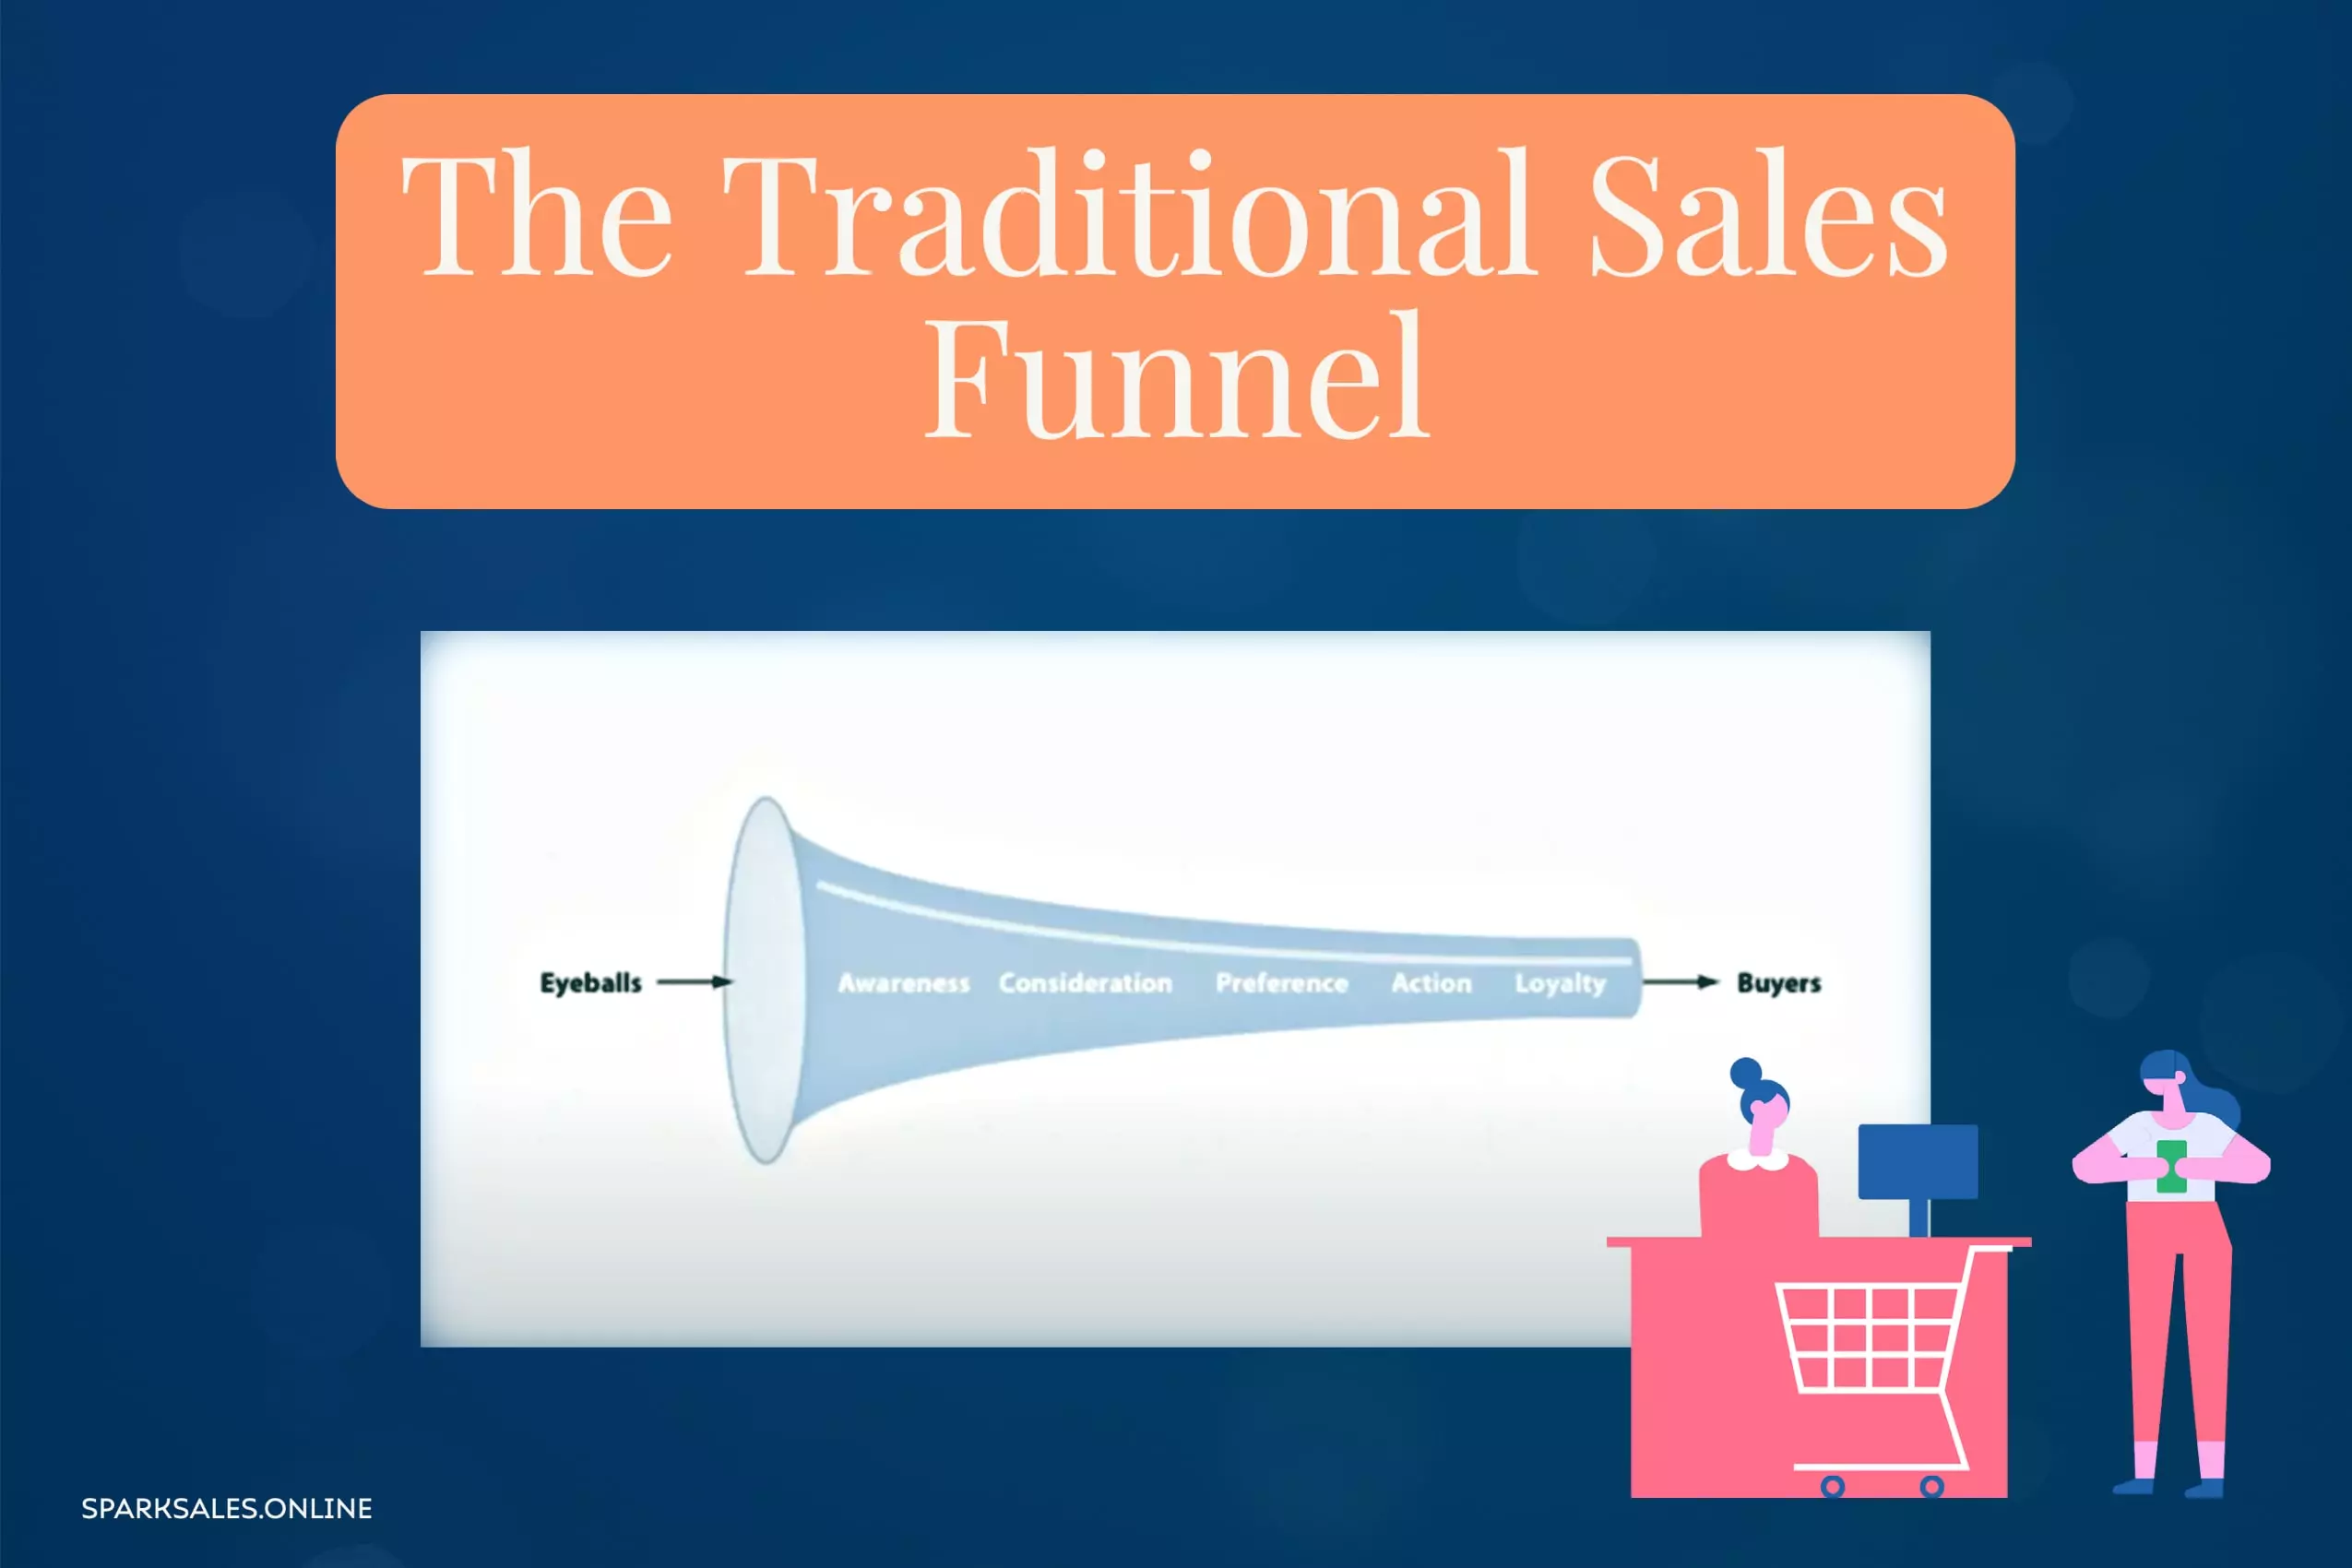 The Traditional Sales Funnel